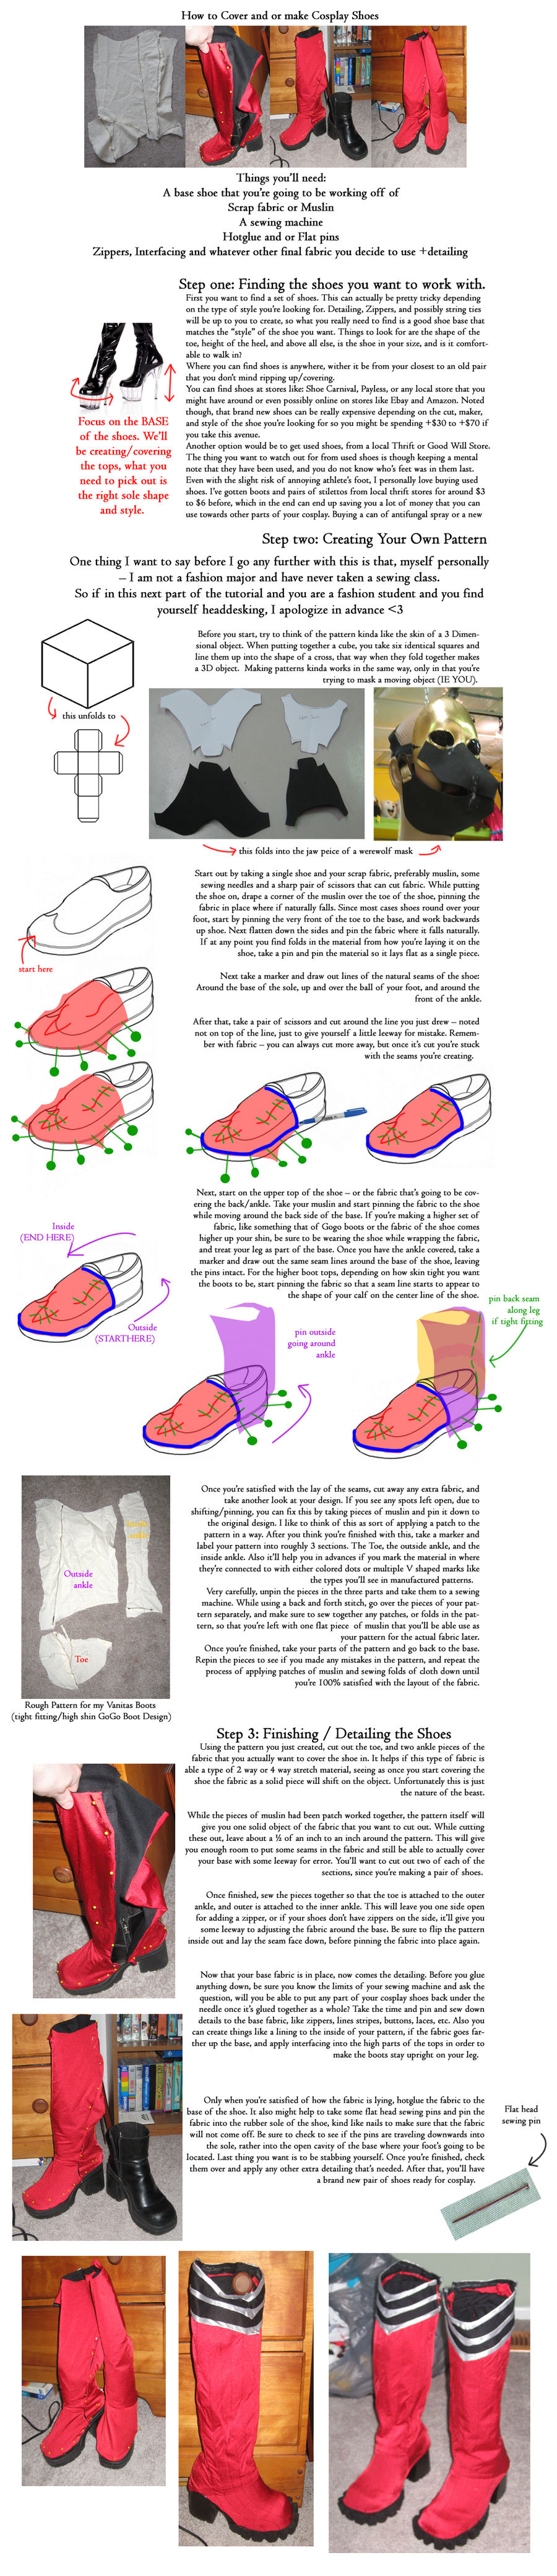 How To Cover Cosplay Shoes